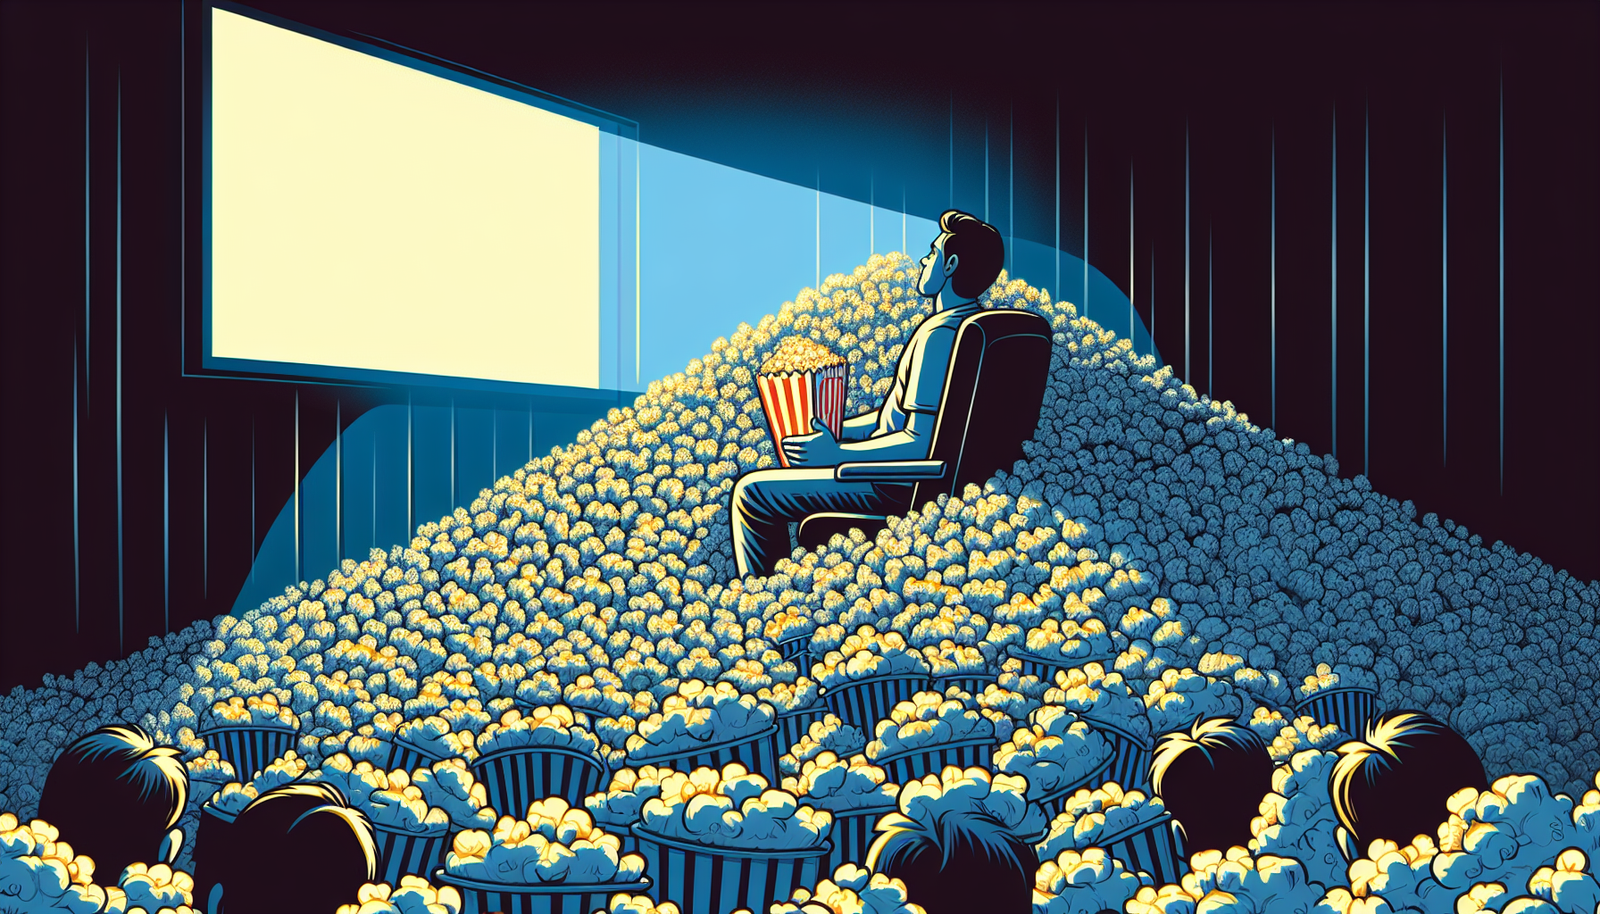 discover if netflix's $4.50 popcorn lives up to the hype as the ultimate movie snack or simply an overpriced indulgence in this thought-provoking article.